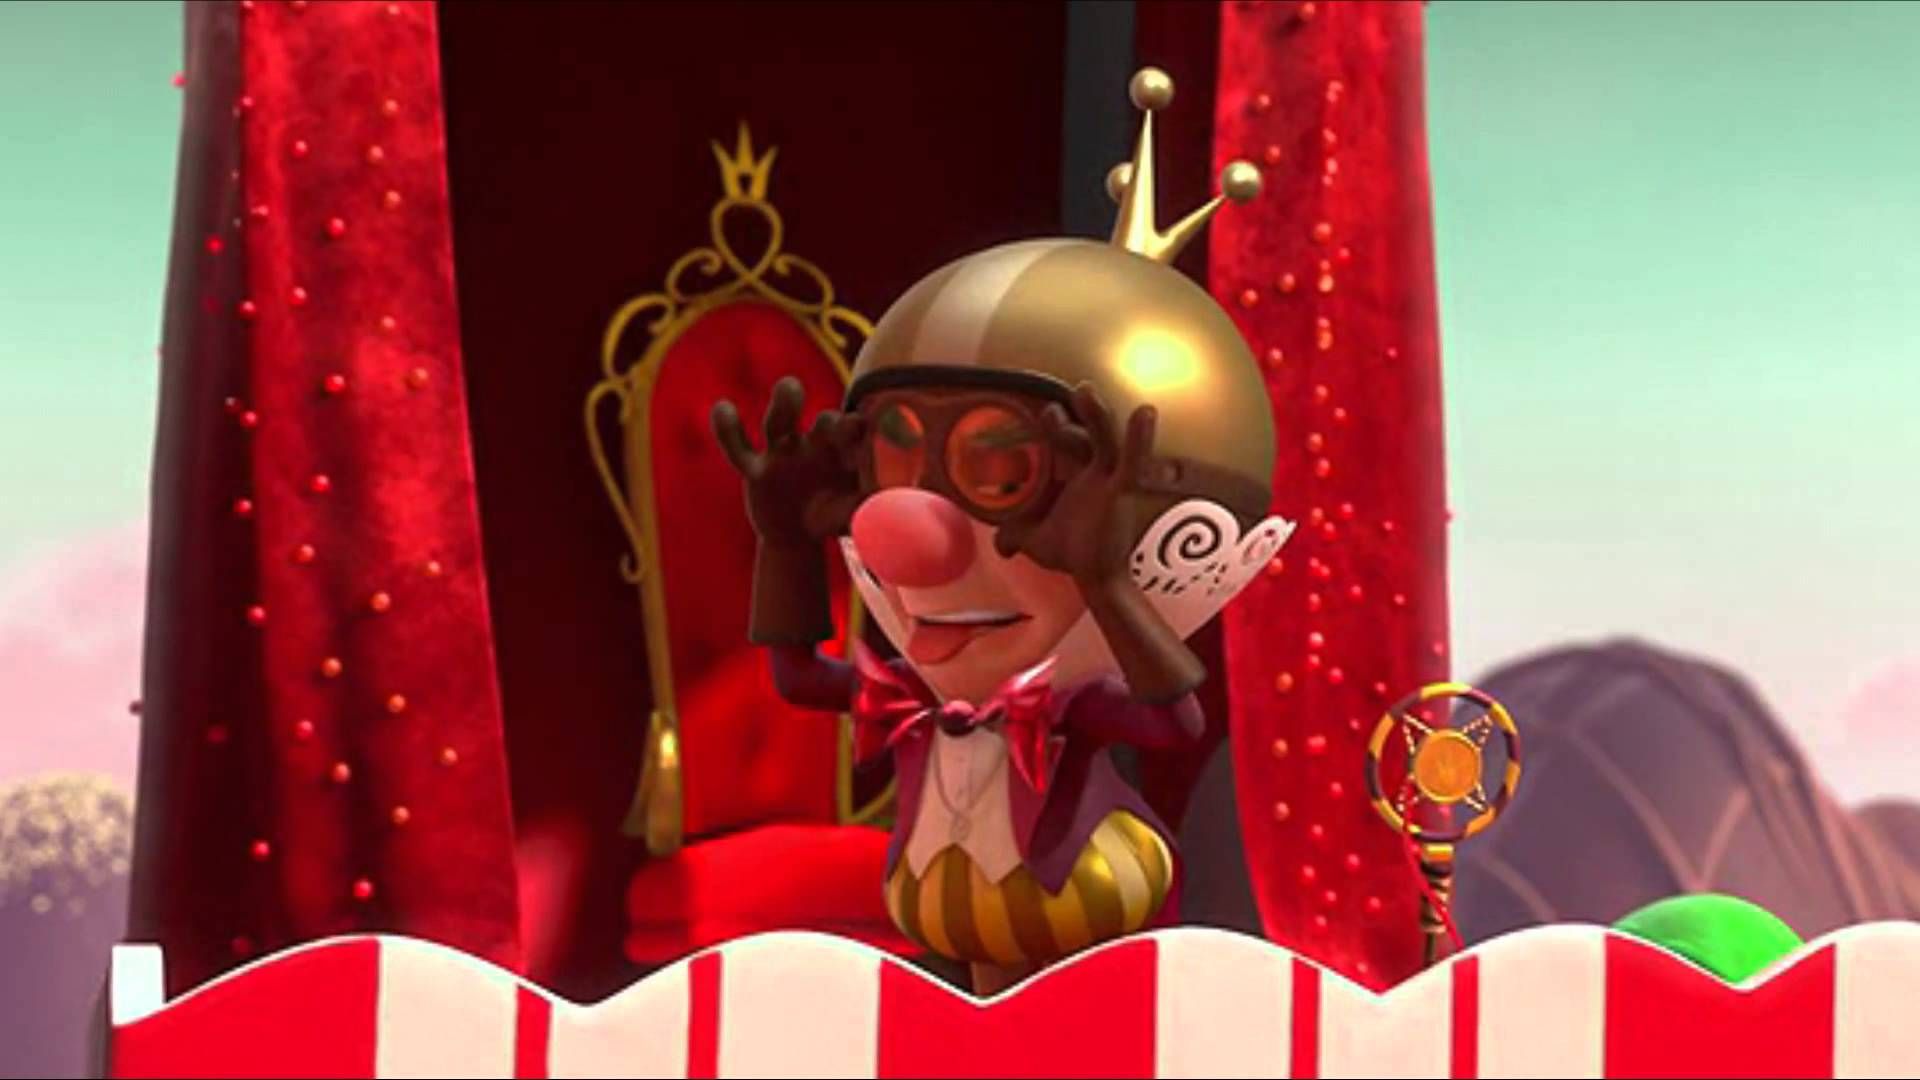 King Candy from Pixar's Wreck it Ralph